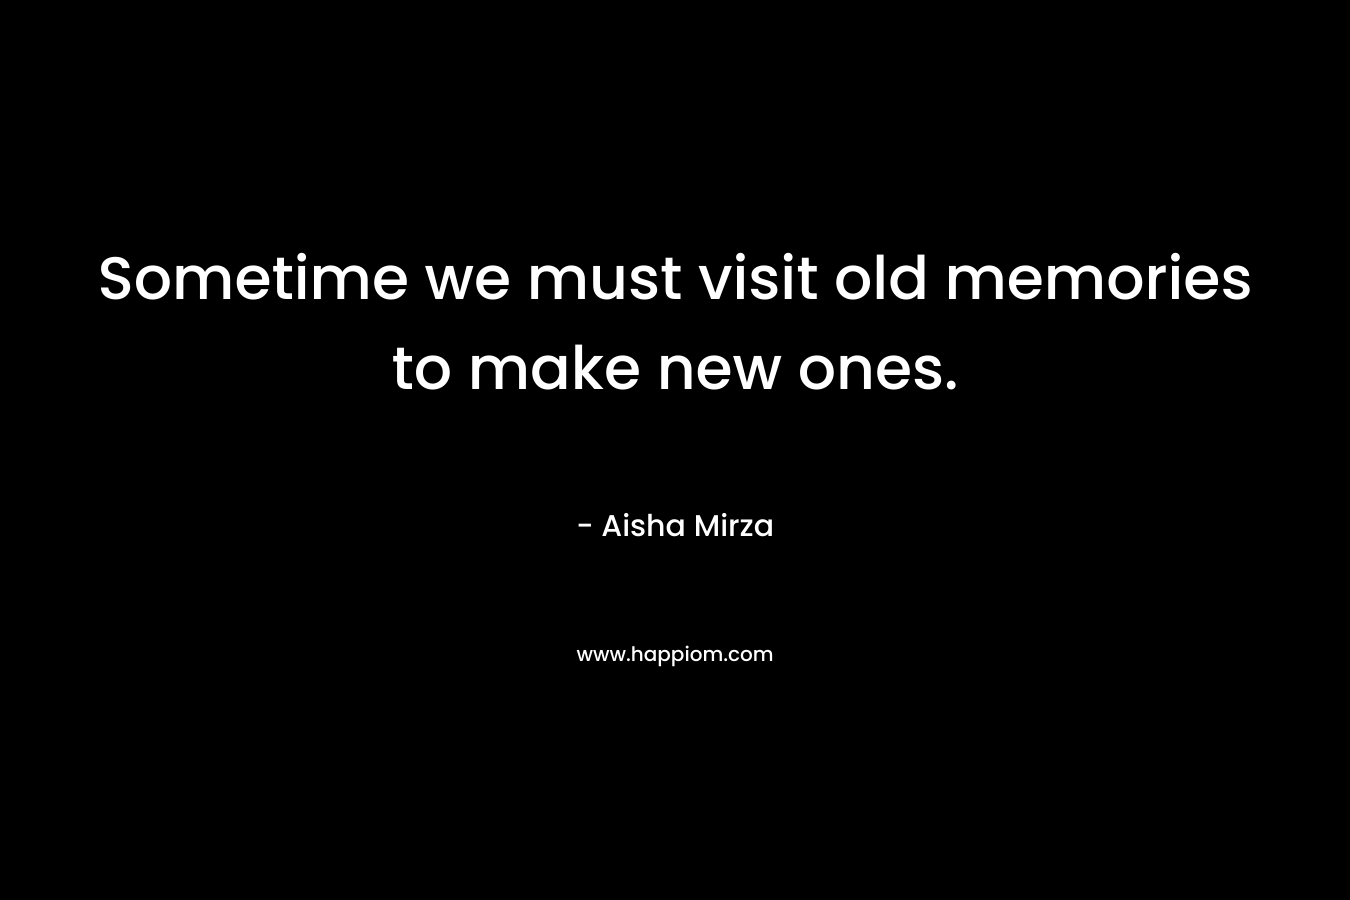 Sometime we must visit old memories to make new ones. – Aisha Mirza